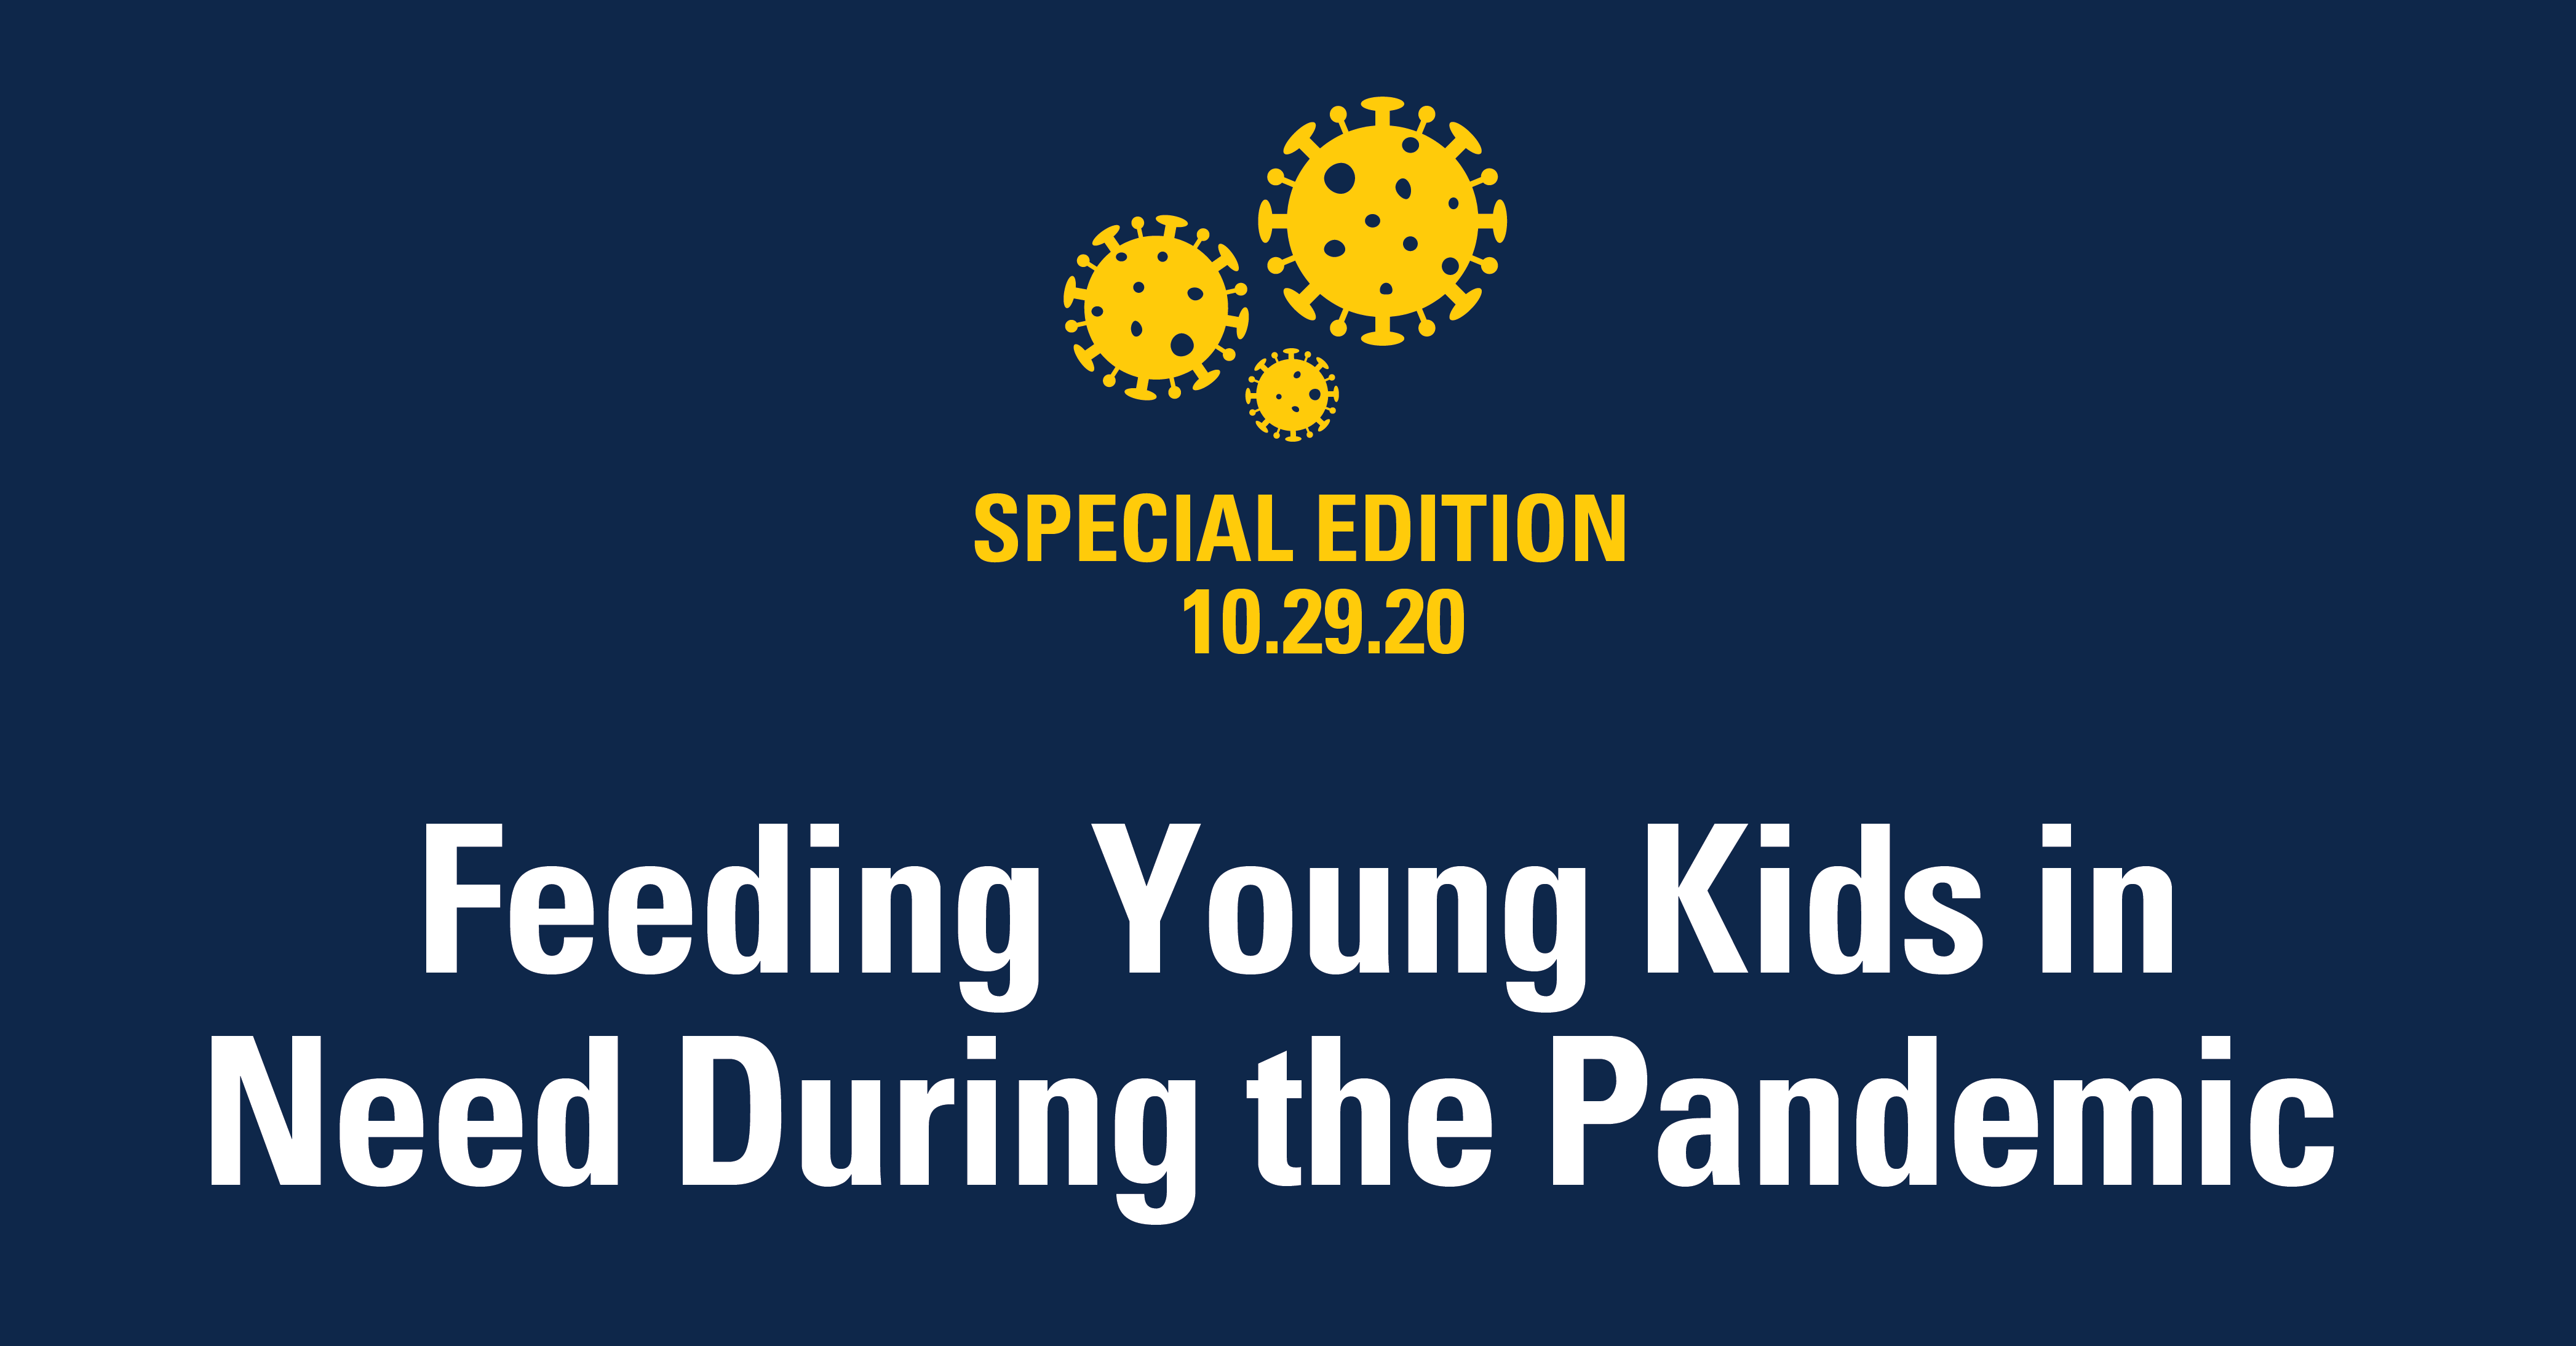 Feeding Young Kids in Need During the Pandemic